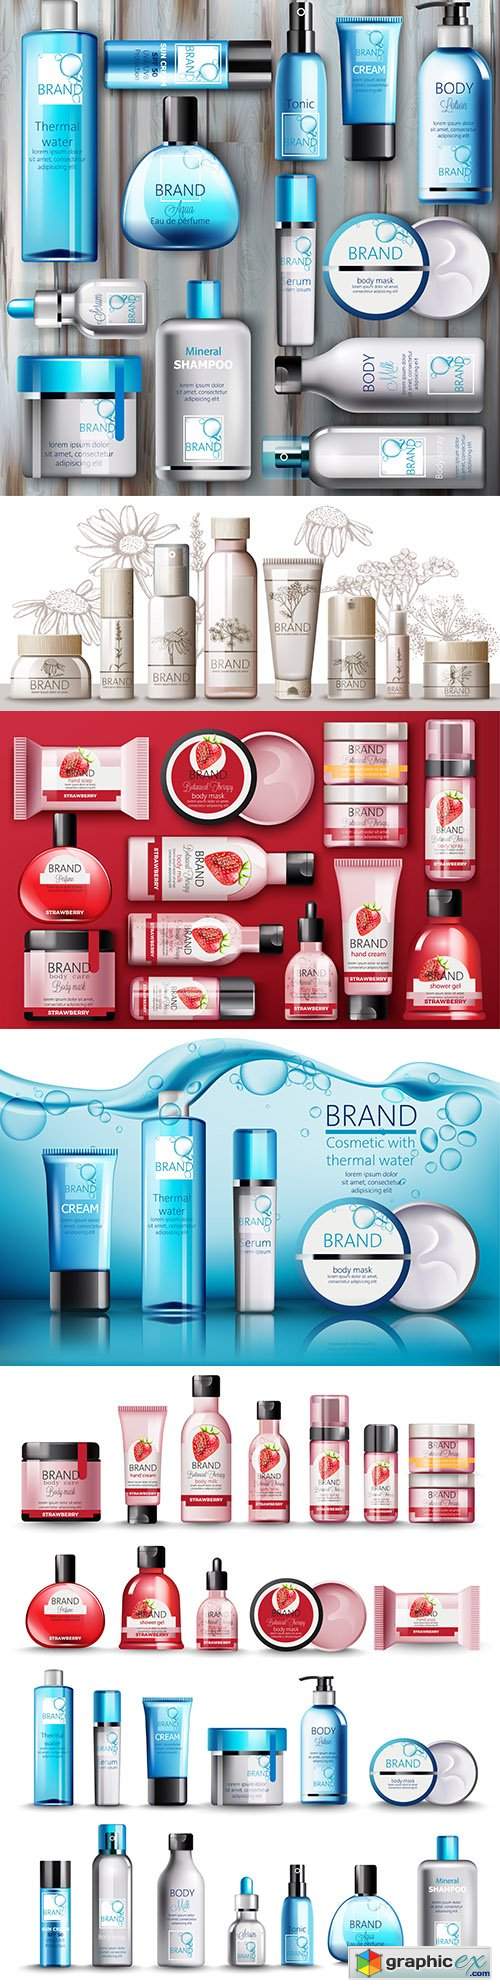  Body cosmetics set Brand name with place for text 3d illustration 2 